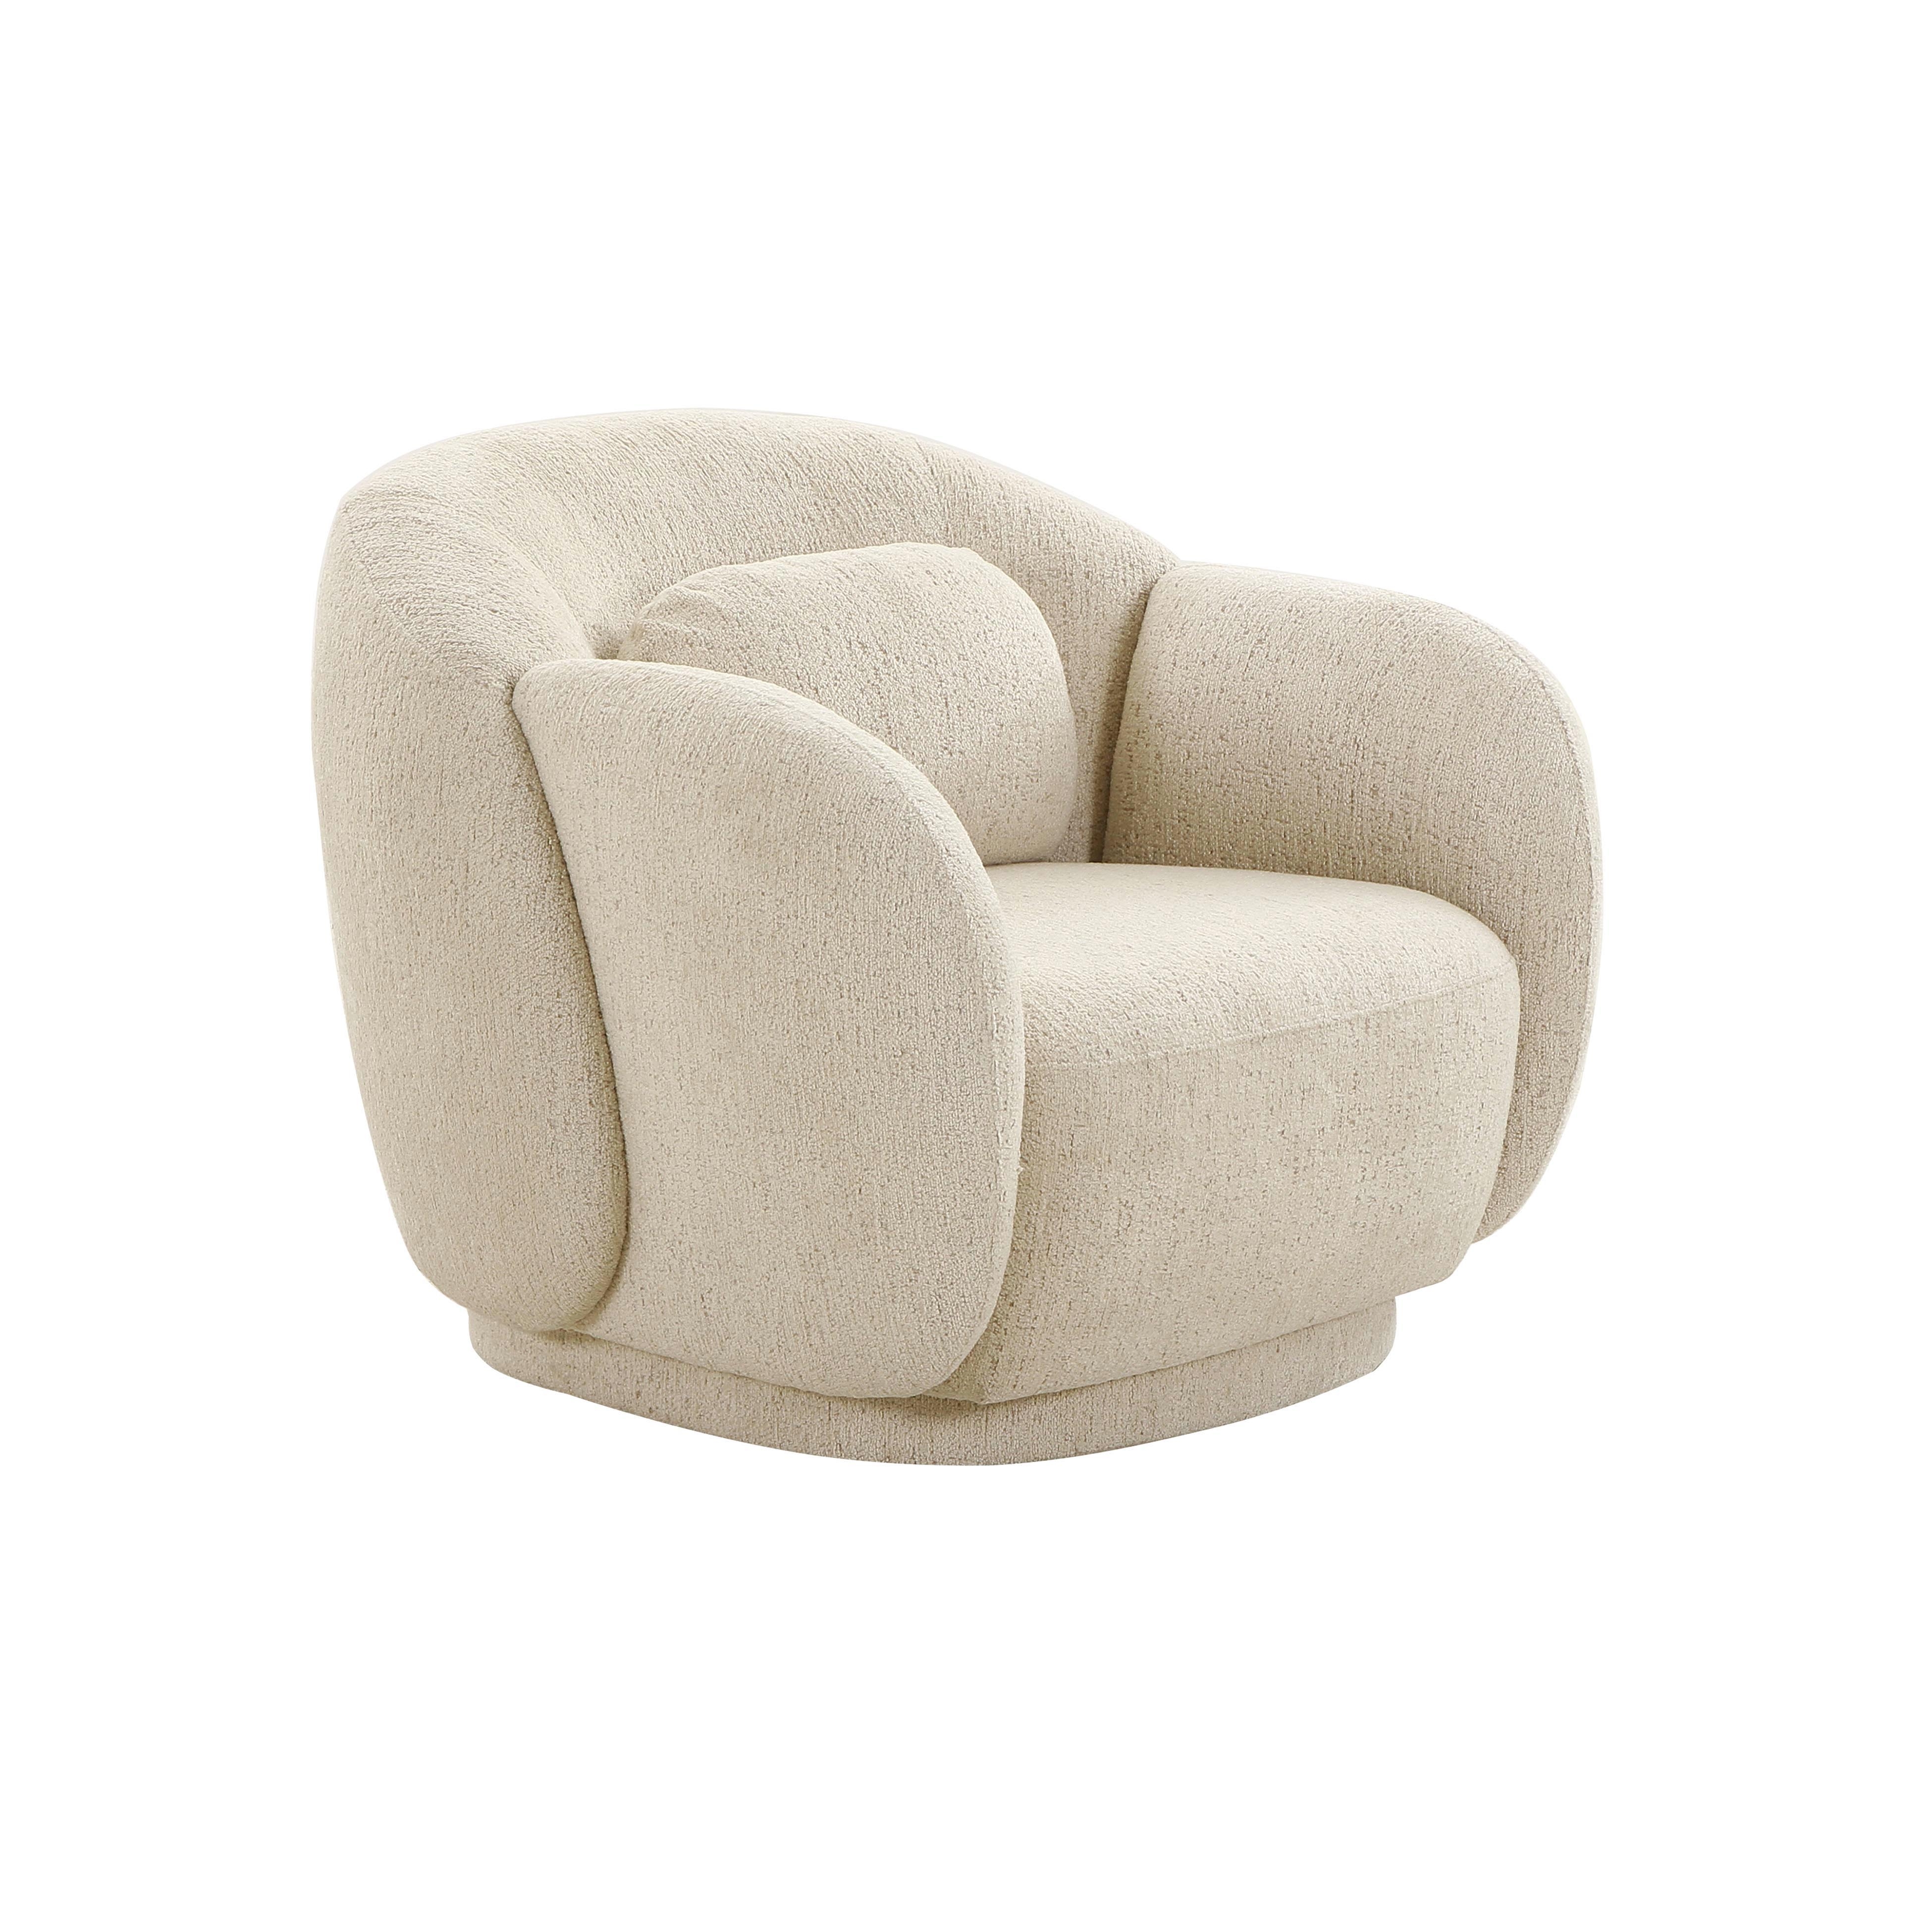 Misty Cream Boucle Accent Chair - Image 1